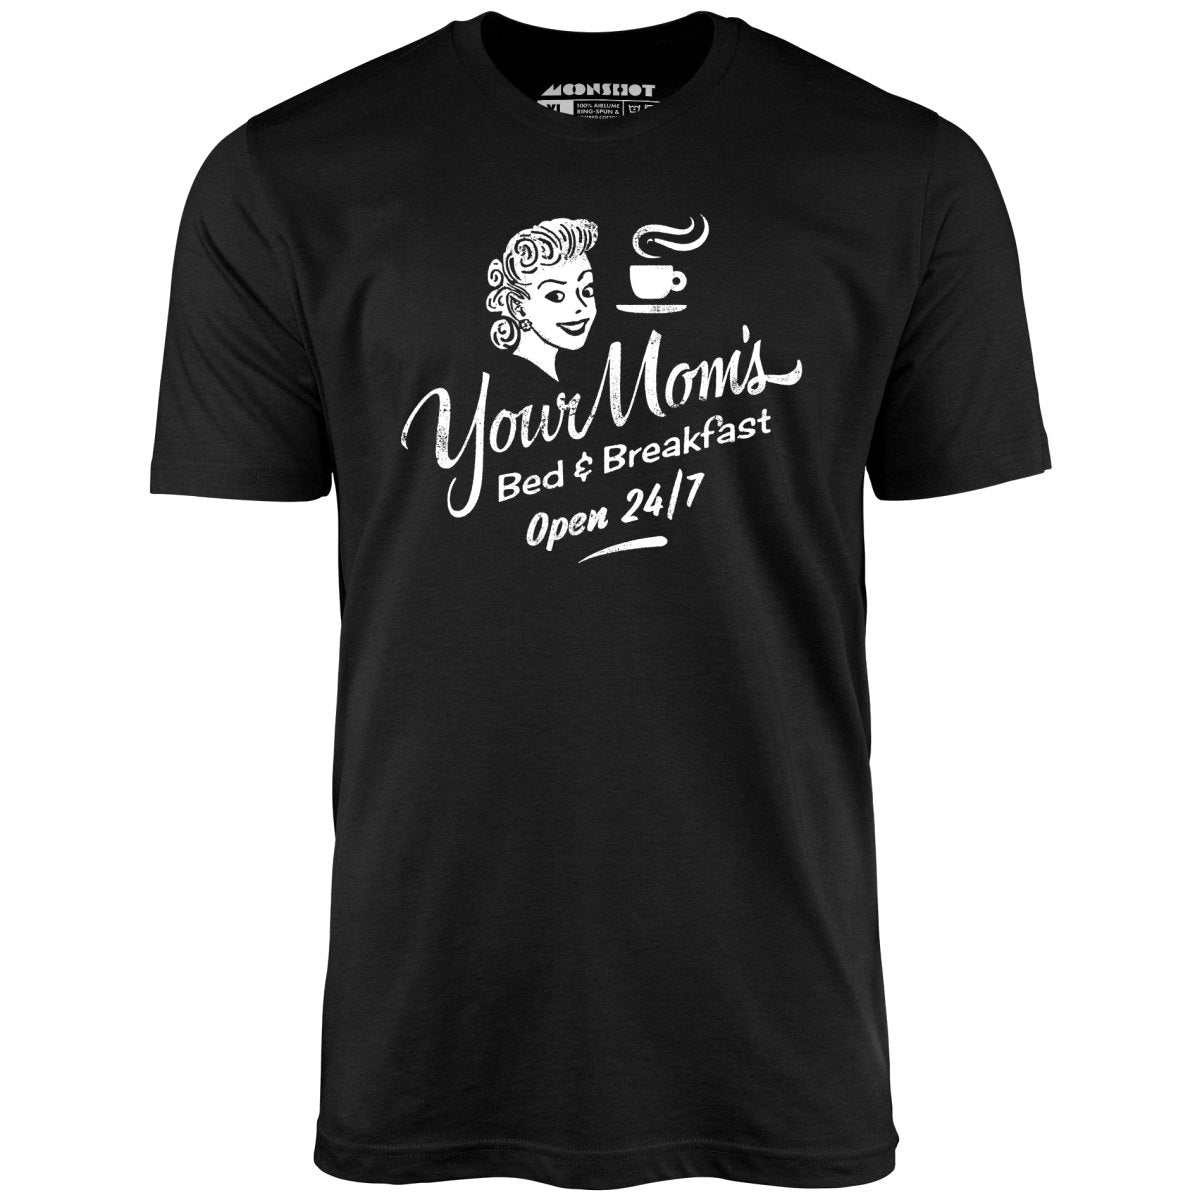 Your Mom's Bed & Breakfast - Unisex T-Shirt